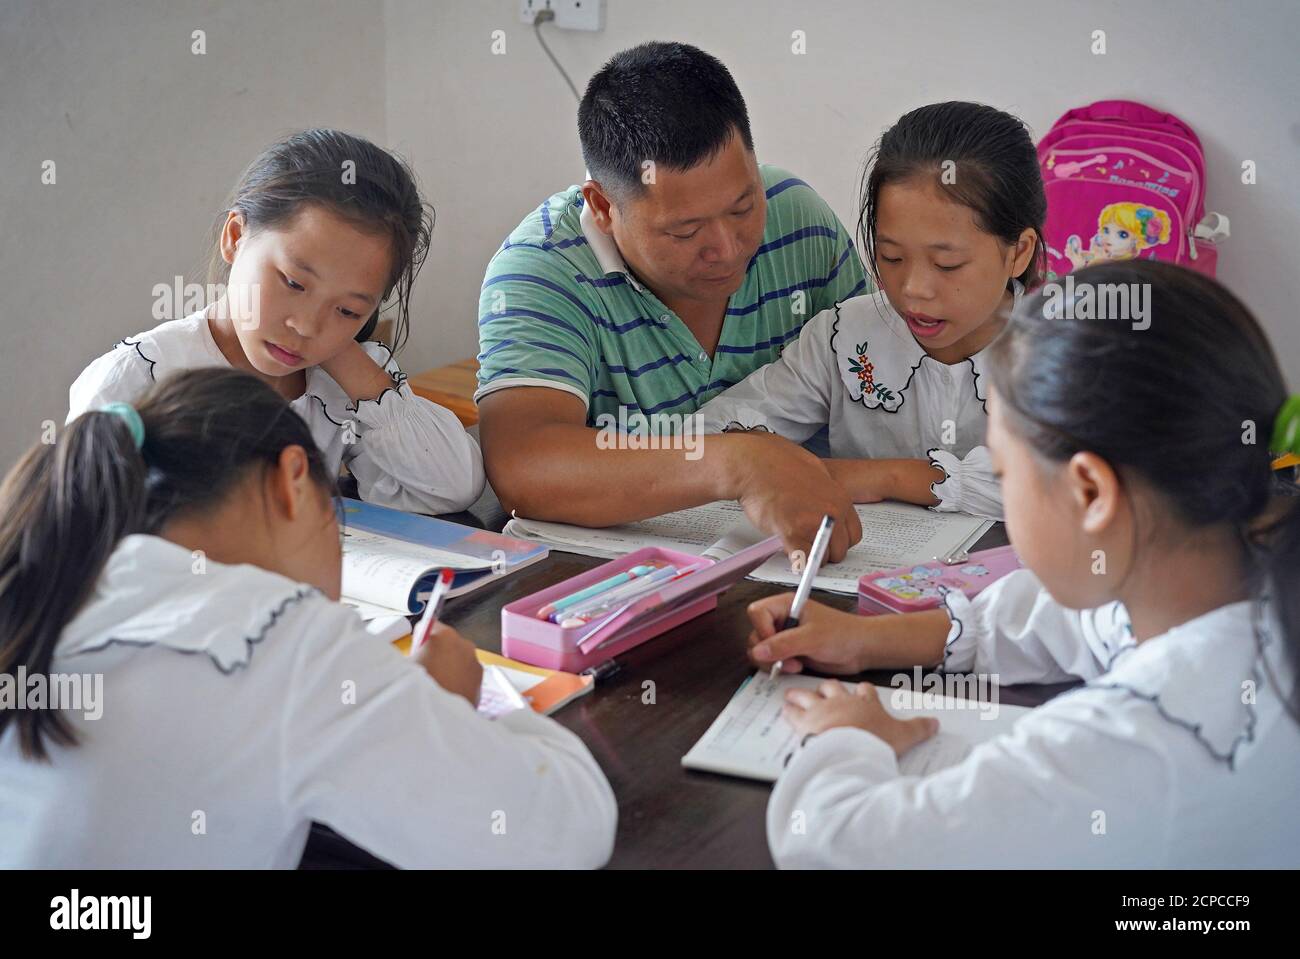 (200919) -- GANZHOU, Sept. 19, 2020 (Xinhua) -- Wu Nianyou guides his daughters in doing homework in Shangbao Village, Ganzhou City of east China's Jiangxi Province, Sept. 9, 2020. Wu Nianyou, a farmer in Shangbao Village of Ganzhou City, and his wife saw their quadruplet daughters come to the world on a morning in September 2010. They named their daughters Wu Mengling, Wu Mengting, Wu Mengyun and Wu Mengqin, who became their worry to raise up with little income only from the fields. Being premature babies, the girls were in poor health conditions which needed lots of money to treat. With the Stock Photo